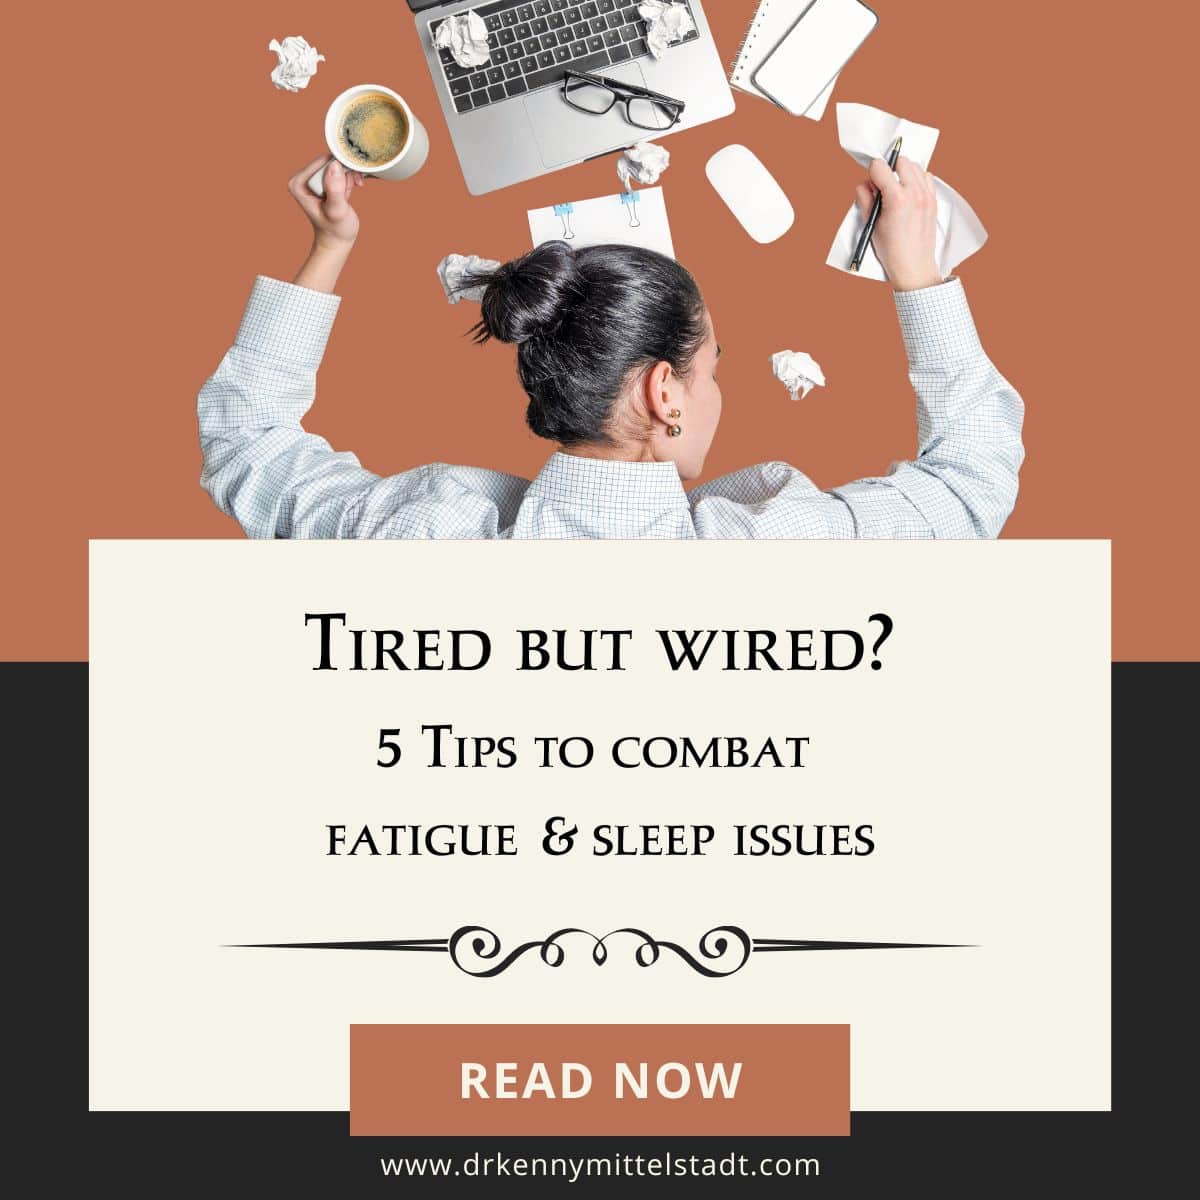 This featured image shows the title of this blog post, "Tired but Wired? 5 Tips to combat Fatigue and Sleep Issues - and shows the image of a woman with her head down on a surface with crumbled papers, coffee in hand, and clearly tired and overworked.